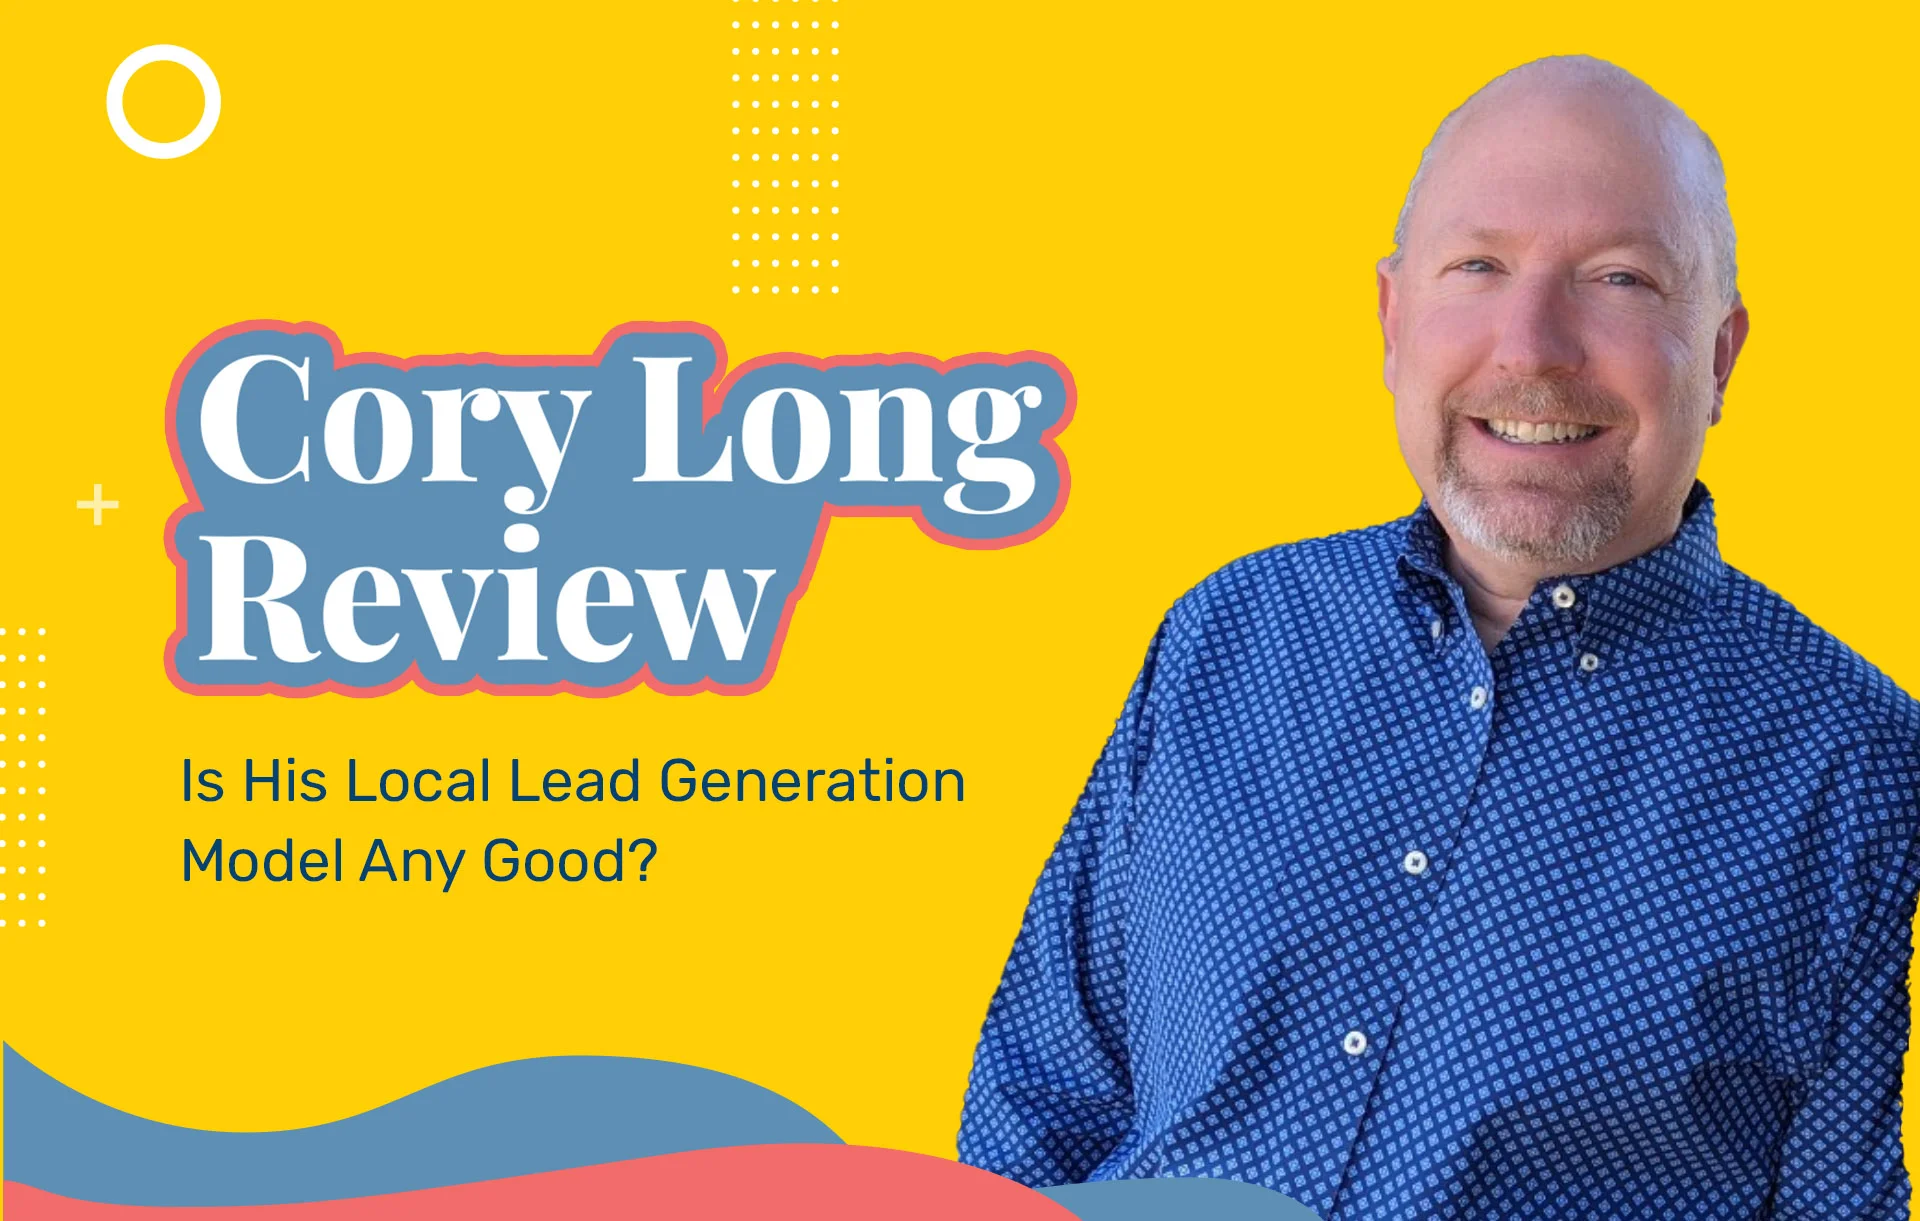 Cory Long Reviews: Is His Local Lead Generation Model Any Good?